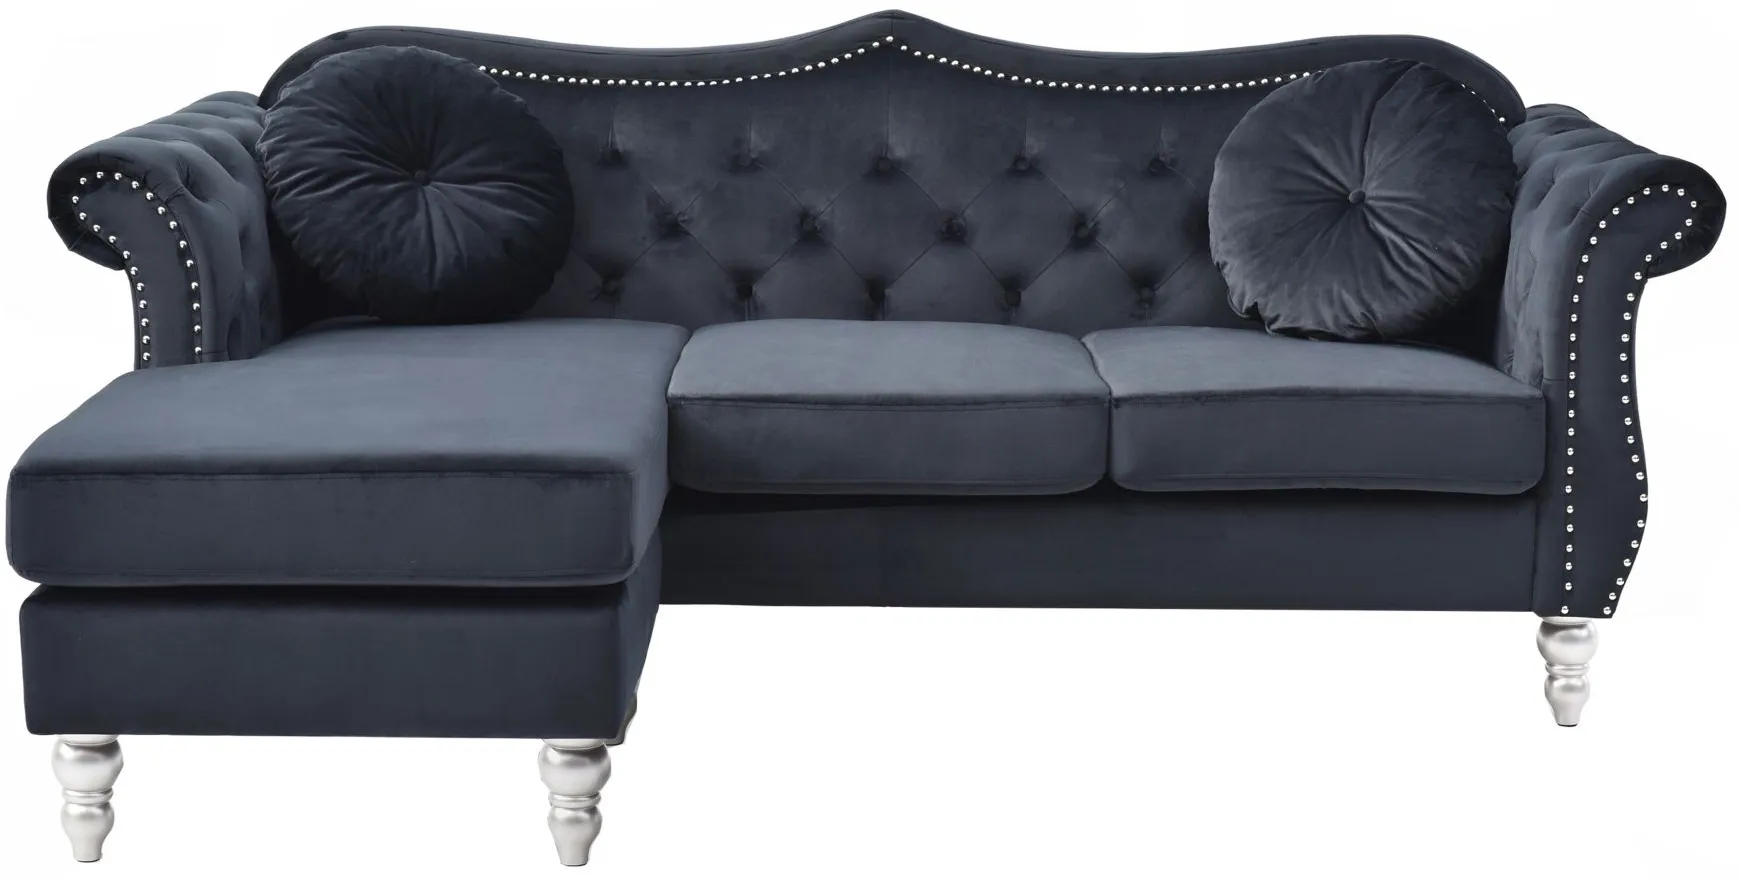 Hollywood Sectional Sofa in Black by Glory Furniture